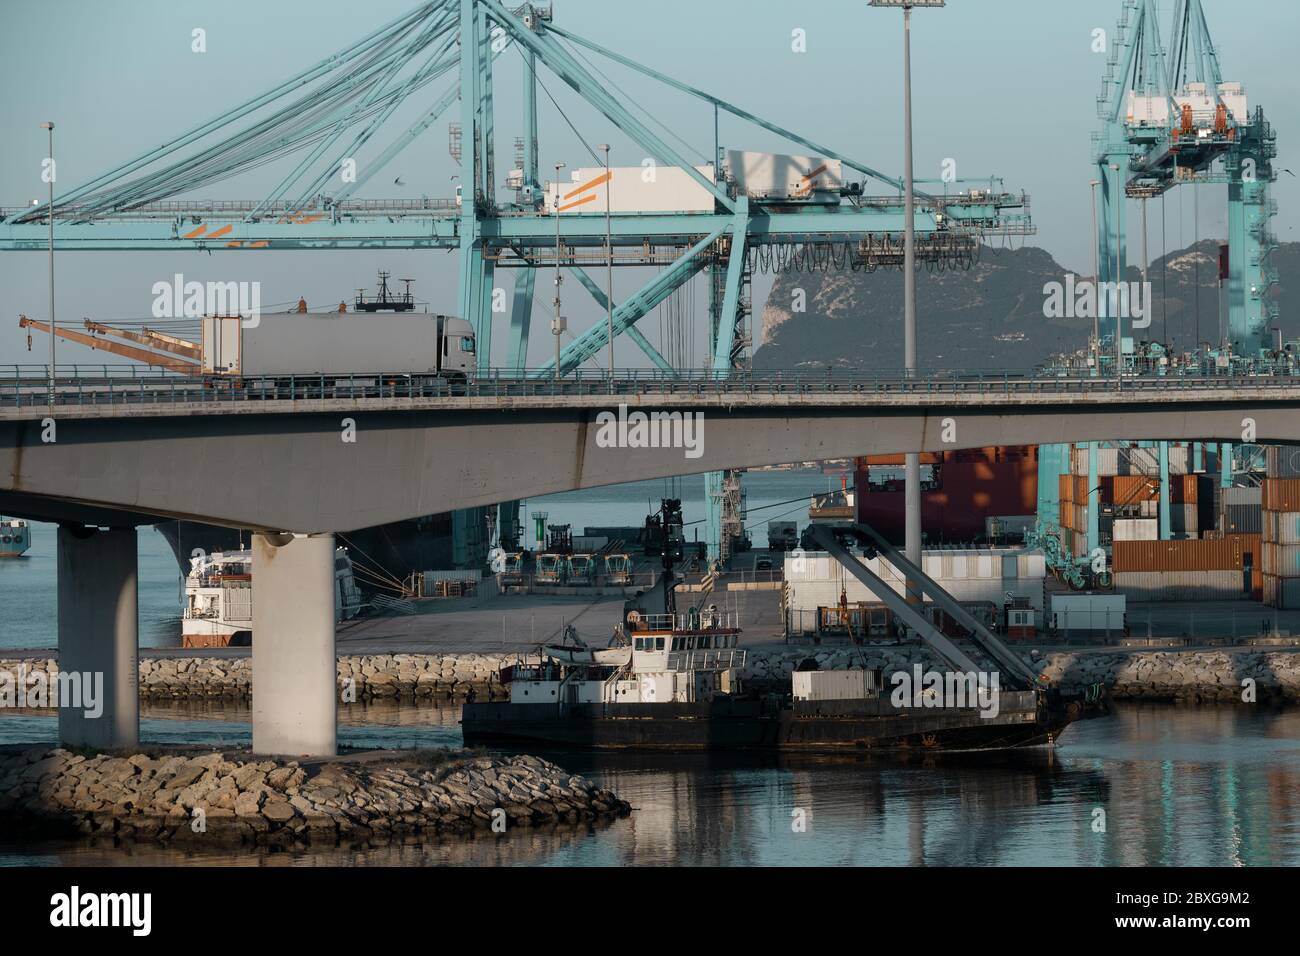 Sea transport and land transport. Activity in the commercial dock of Algeciras, Spain, with trucks and ships loading and unloading containers. Stock Photo